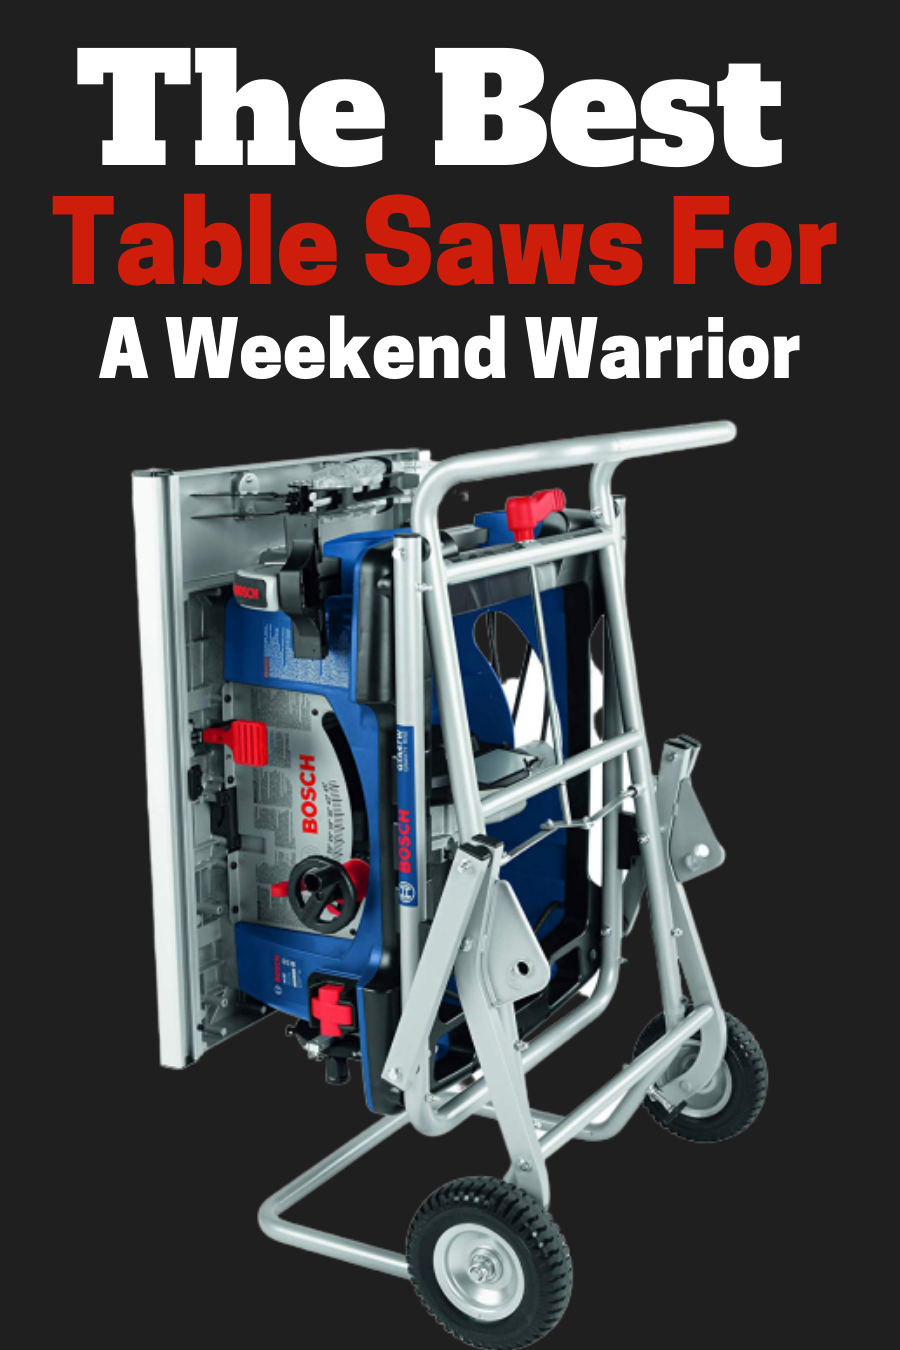 The 10 Best Table Saws For A Weekend Warrior - The 10 Best Table Saws For A Weekend Warrior -   17 diy Table saw ideas